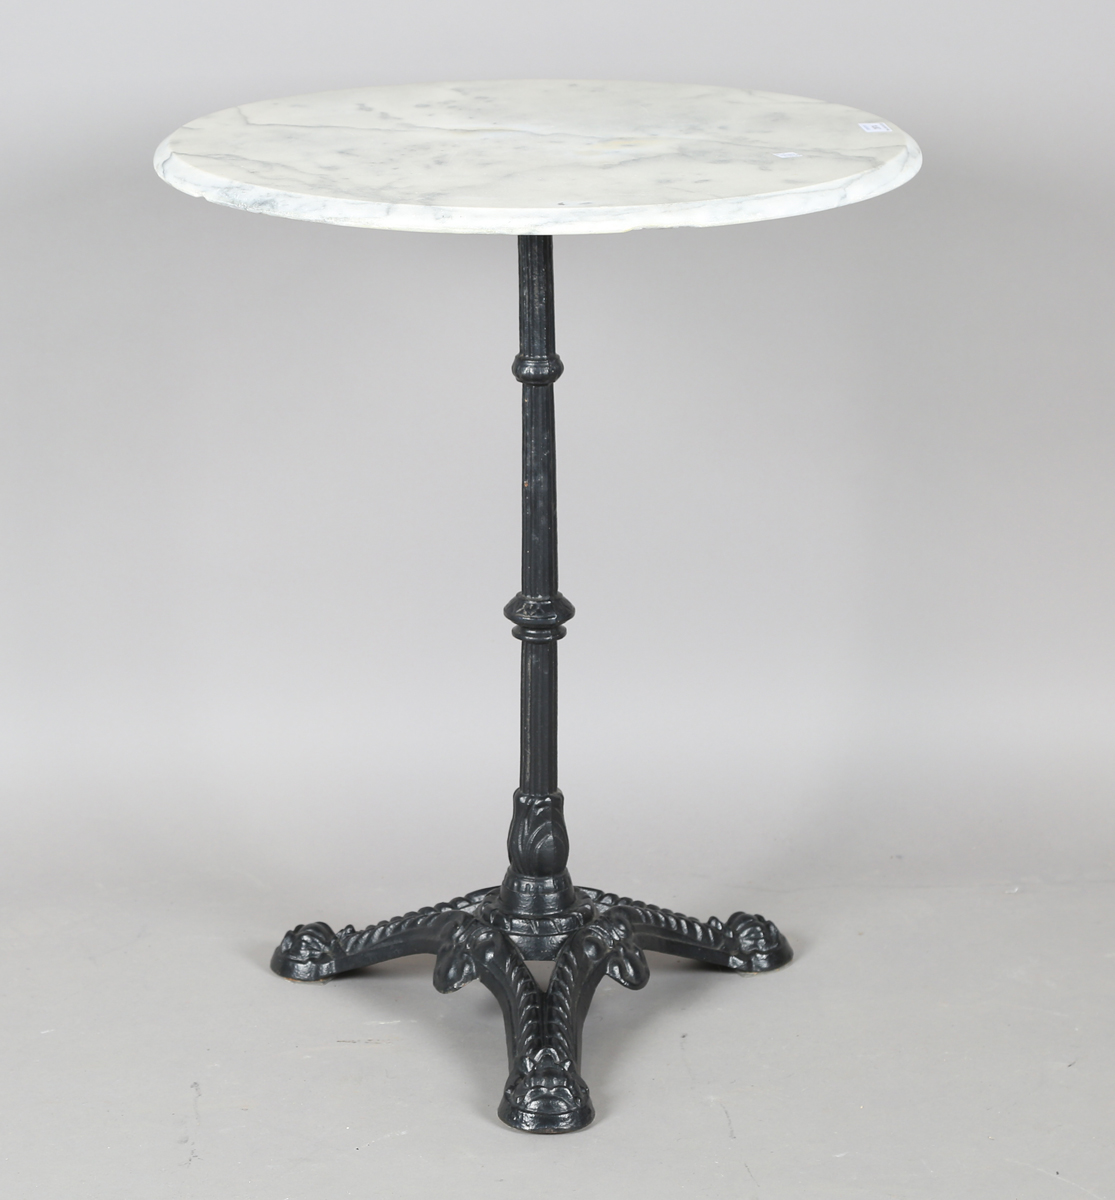 A 20th century black painted cast iron and marble-topped table, height 74cm, diameter 60cm.Buyer’s